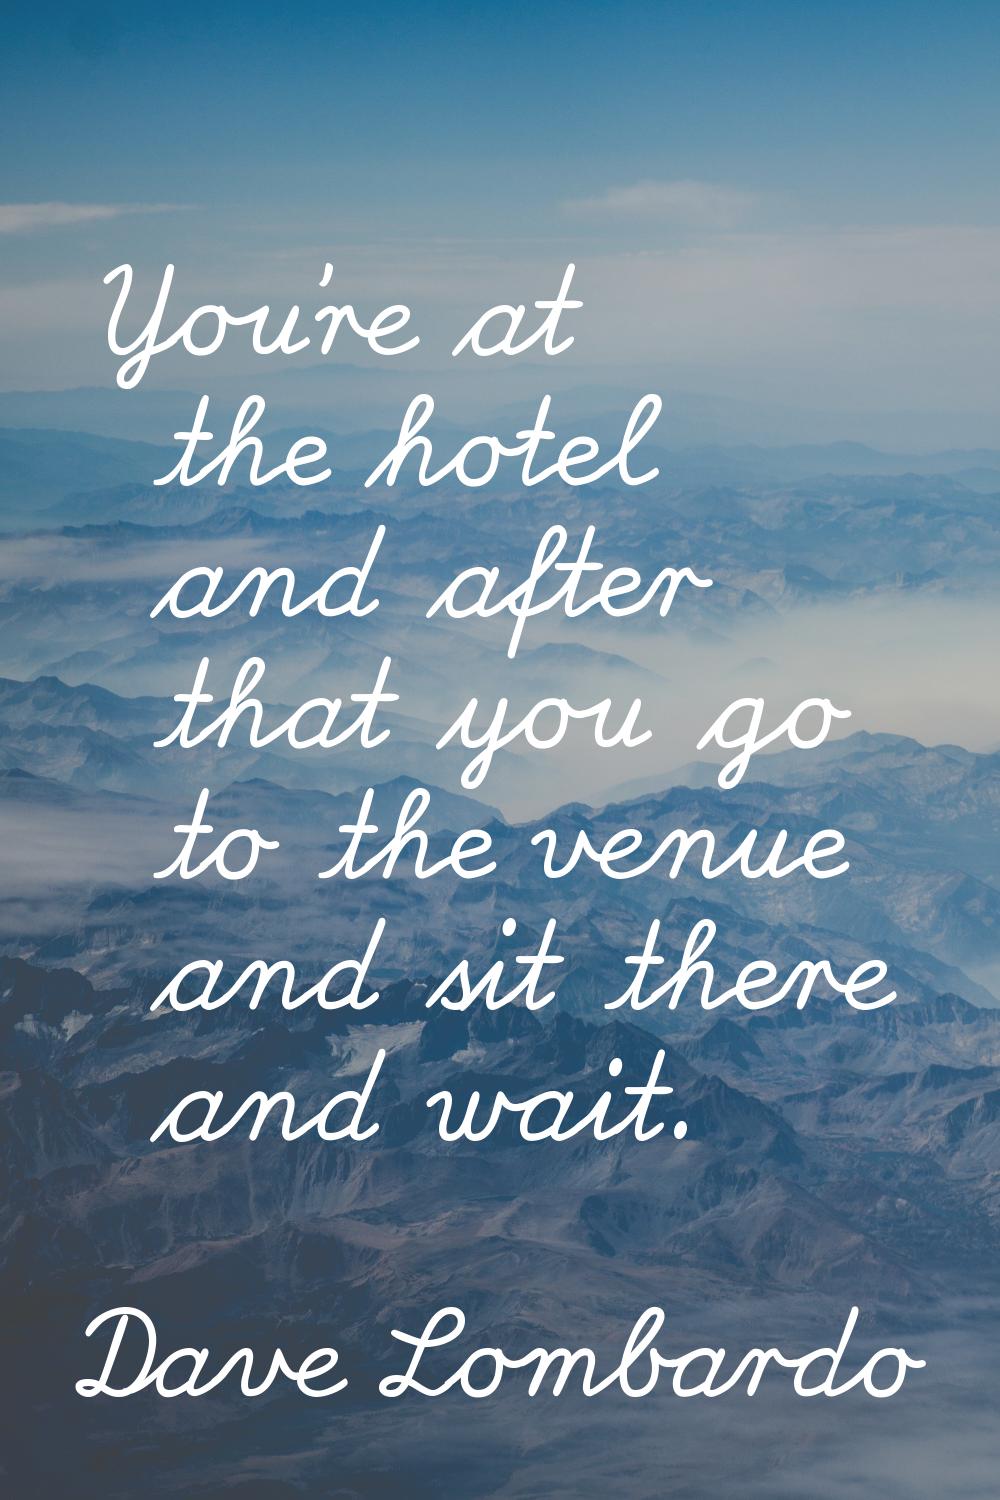 You're at the hotel and after that you go to the venue and sit there and wait.